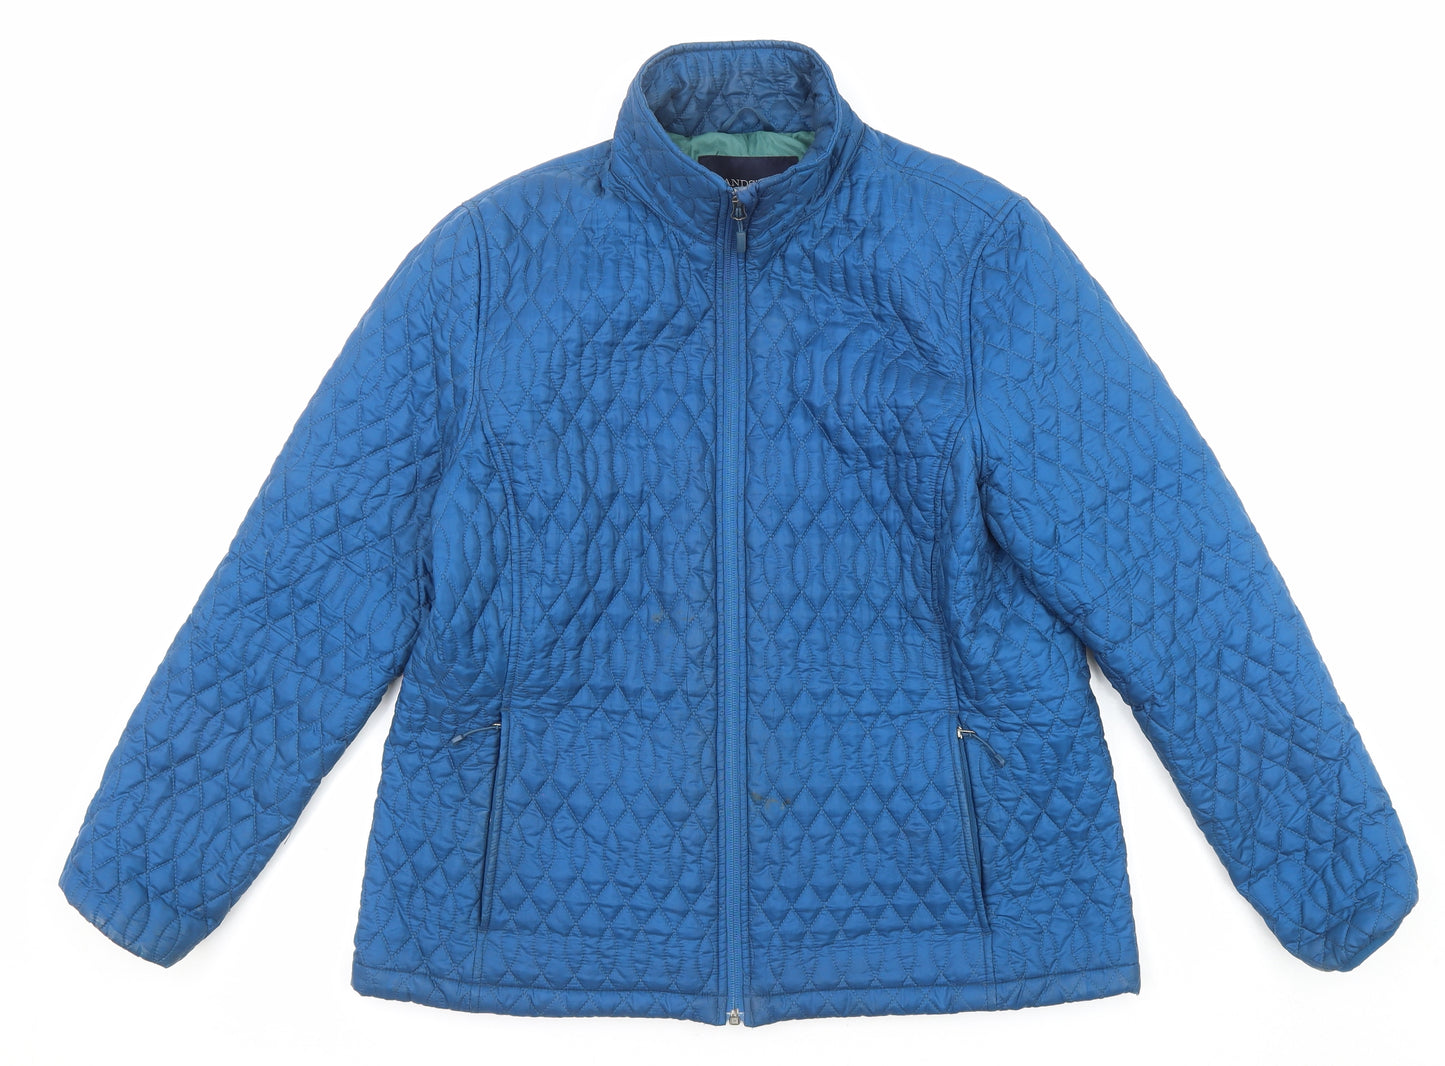 Lands' End Womens Blue Quilted Jacket Size 14 Zip